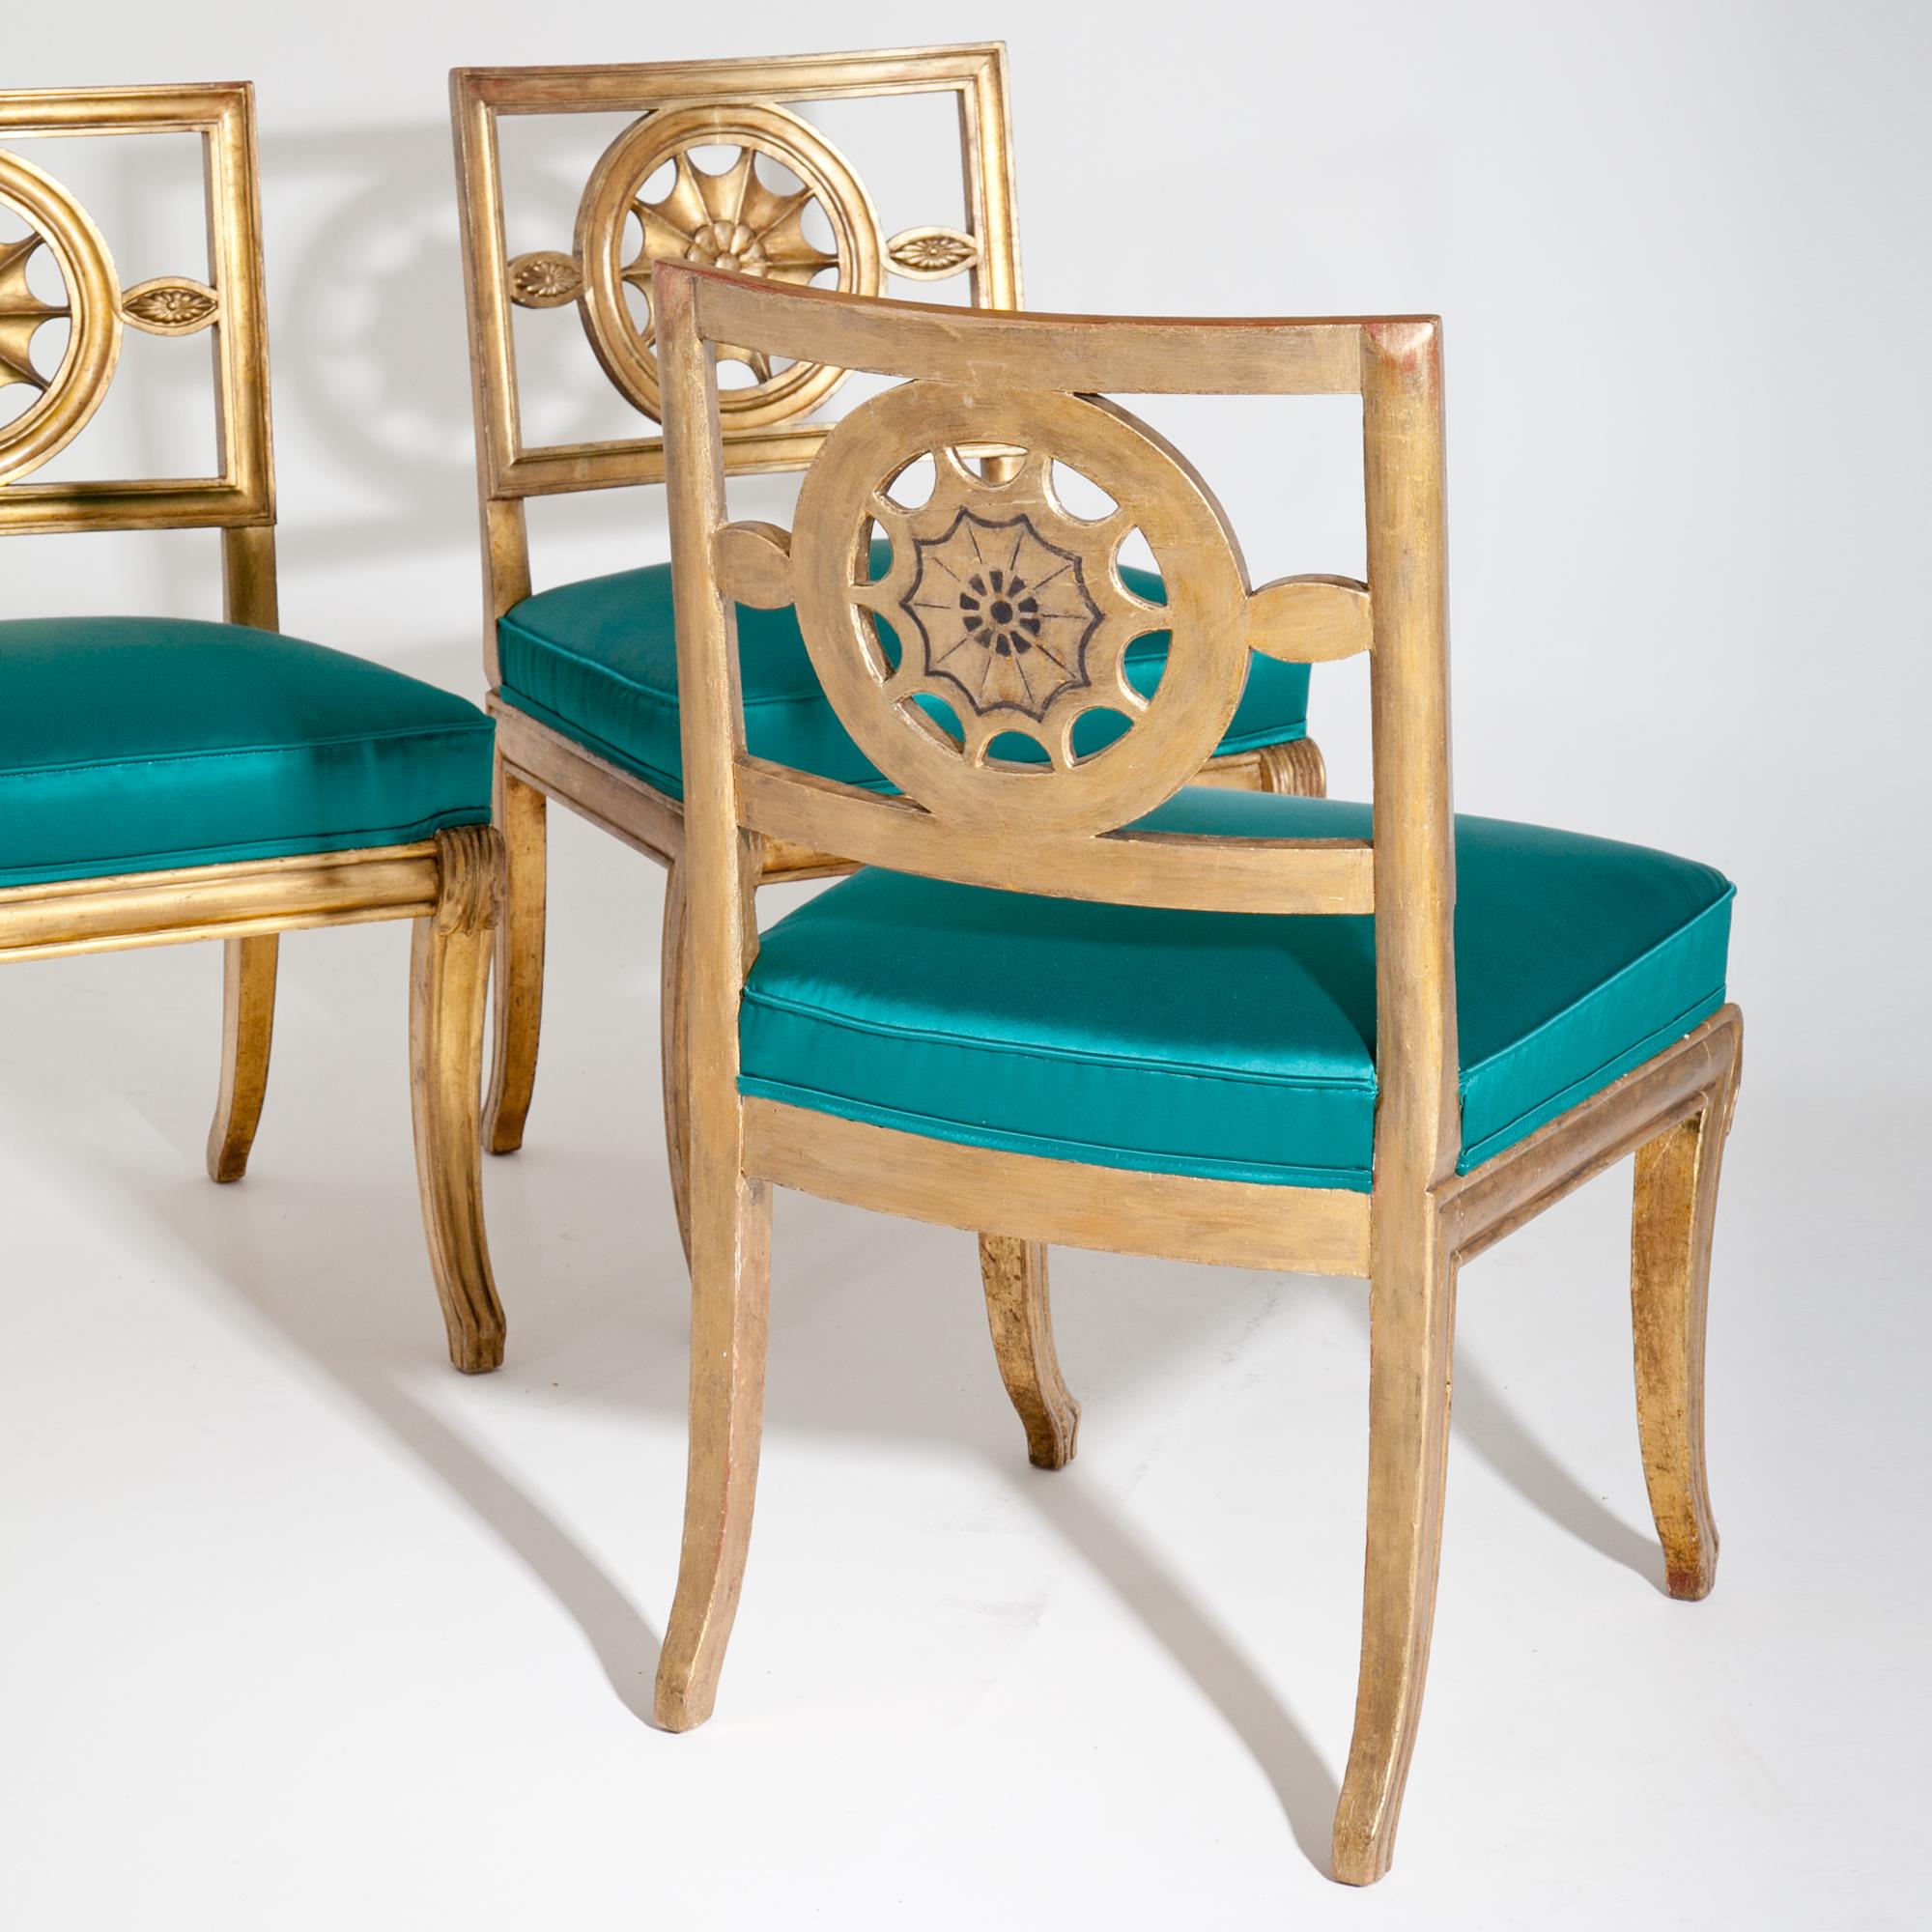 German Neoclassical Chairs, Berlin First Half of the 19th Century